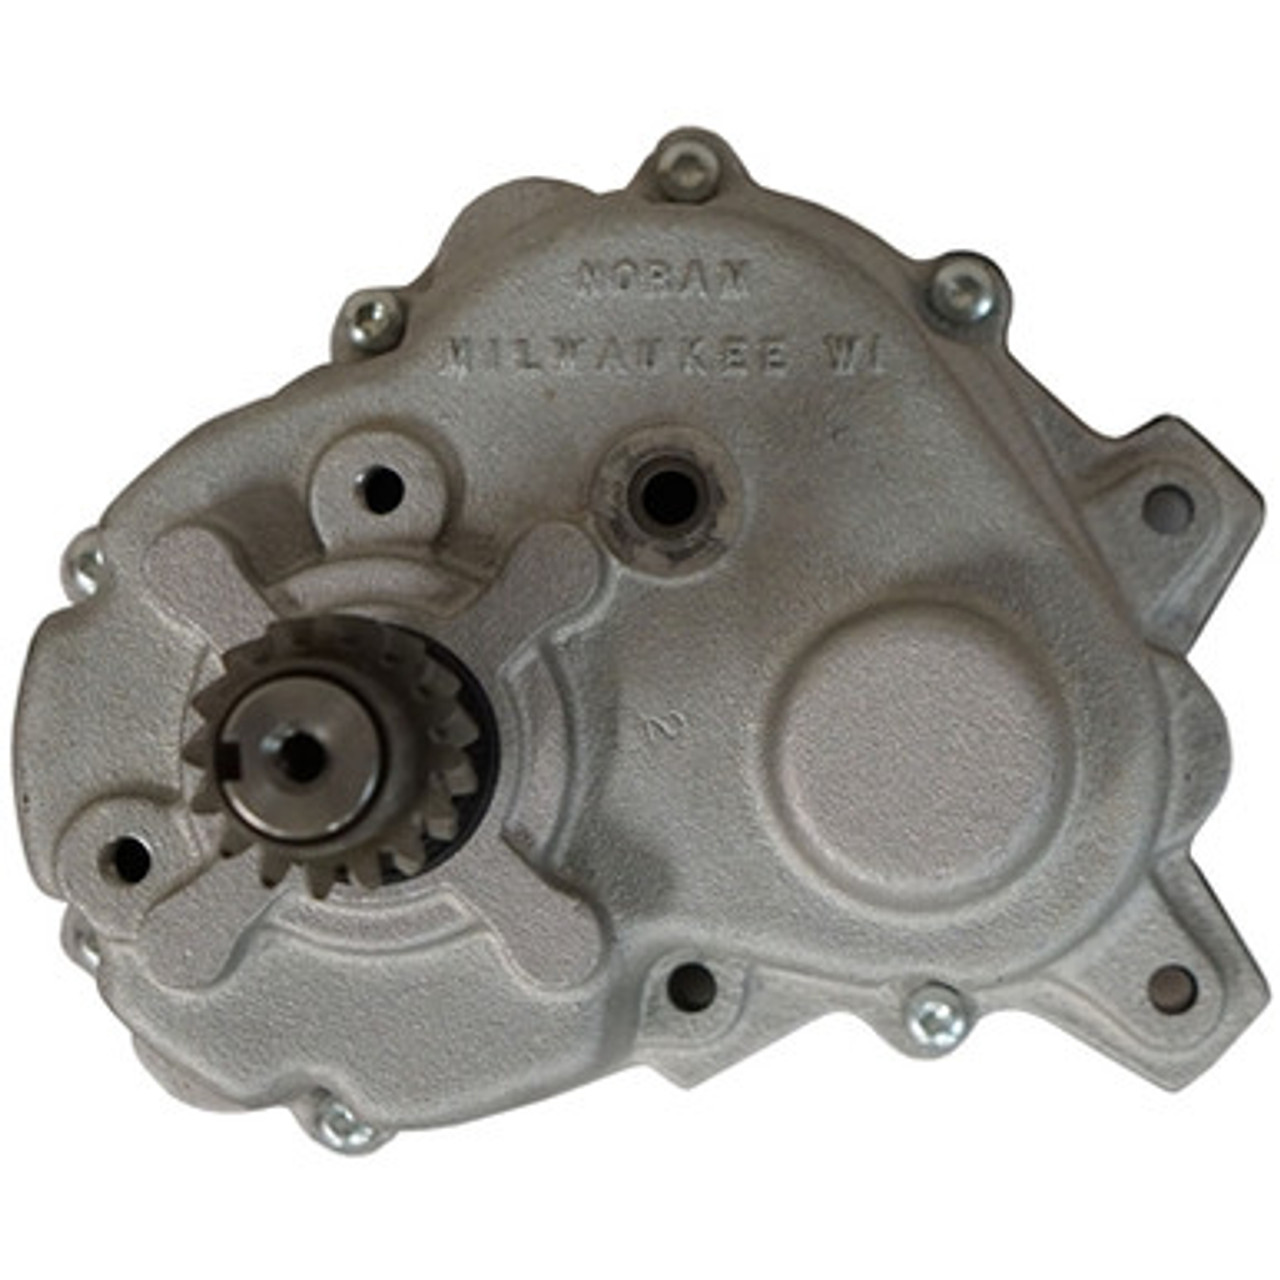 Reduction gear, gearbox